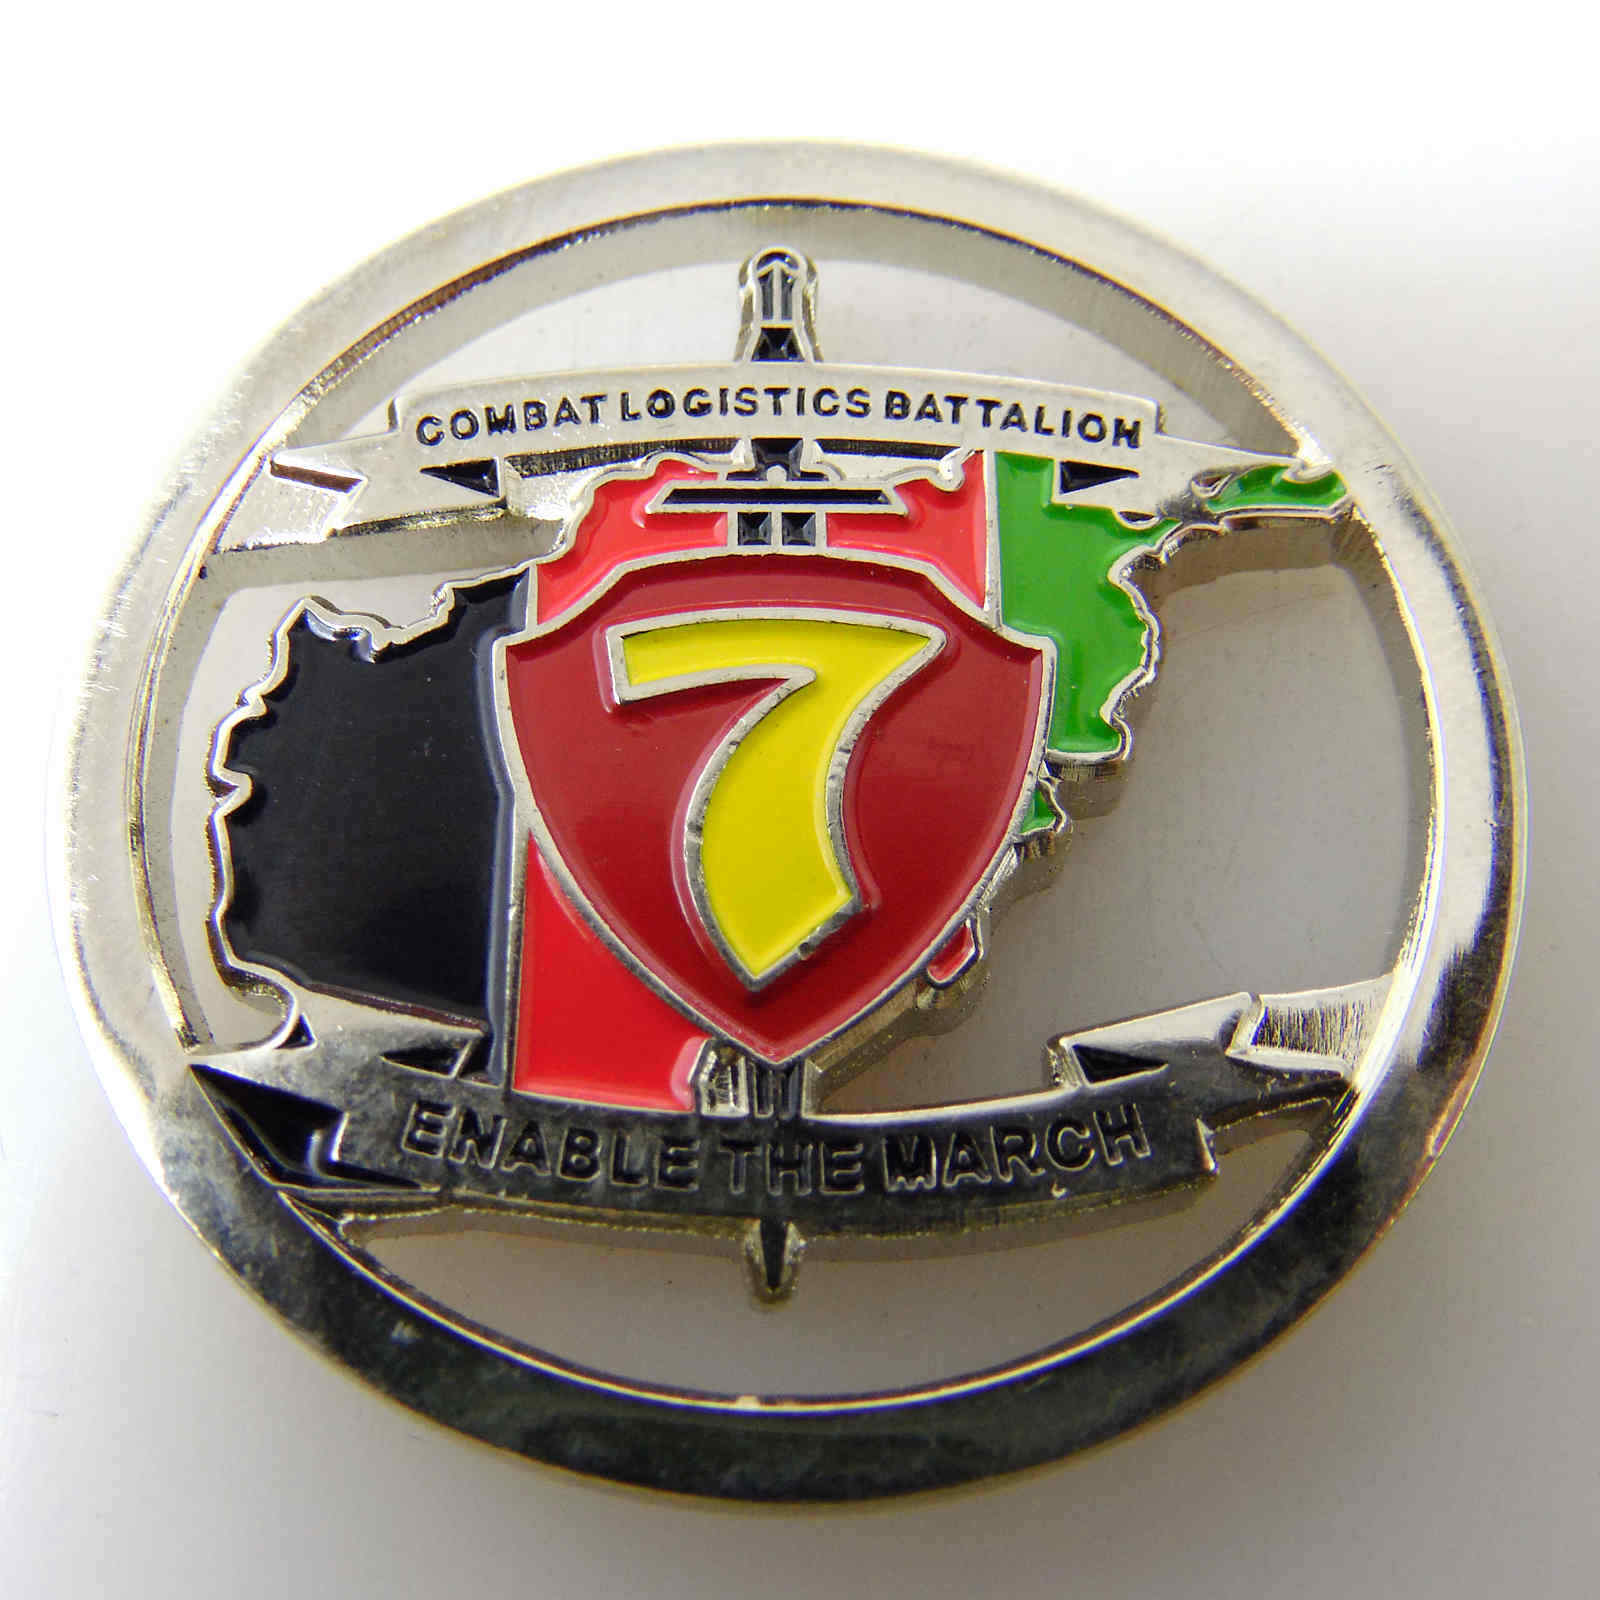 ENABLE THE MARCH COMBAT LOGISTICS BATTALION HELMAND OEF 14.1 CHALLENGE COIN